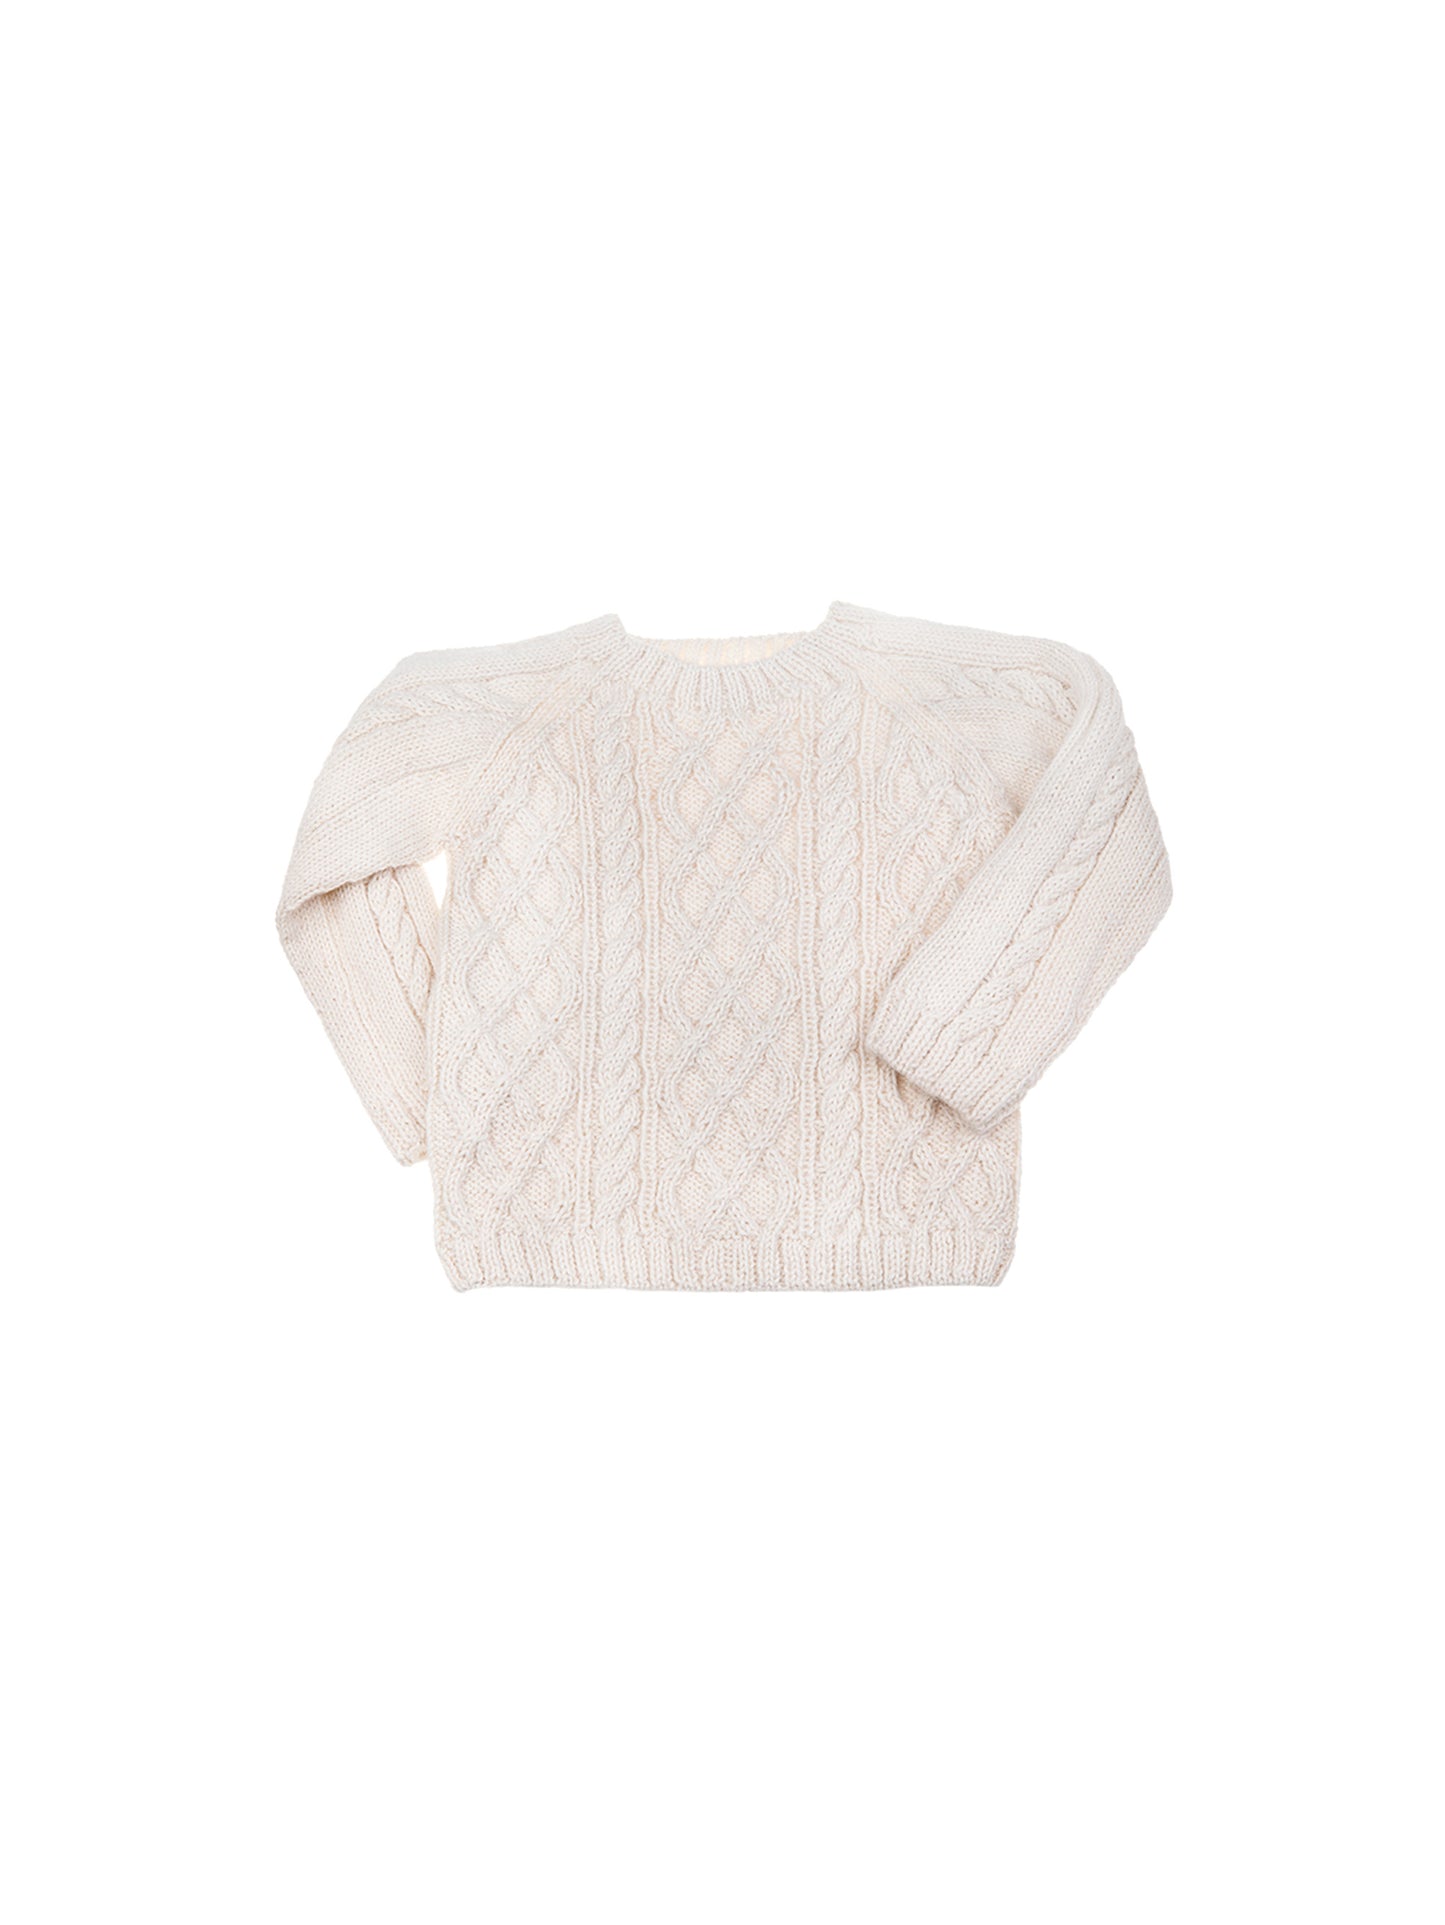 Baby Alpaca Cream Cable Knit Sweater Weston Table